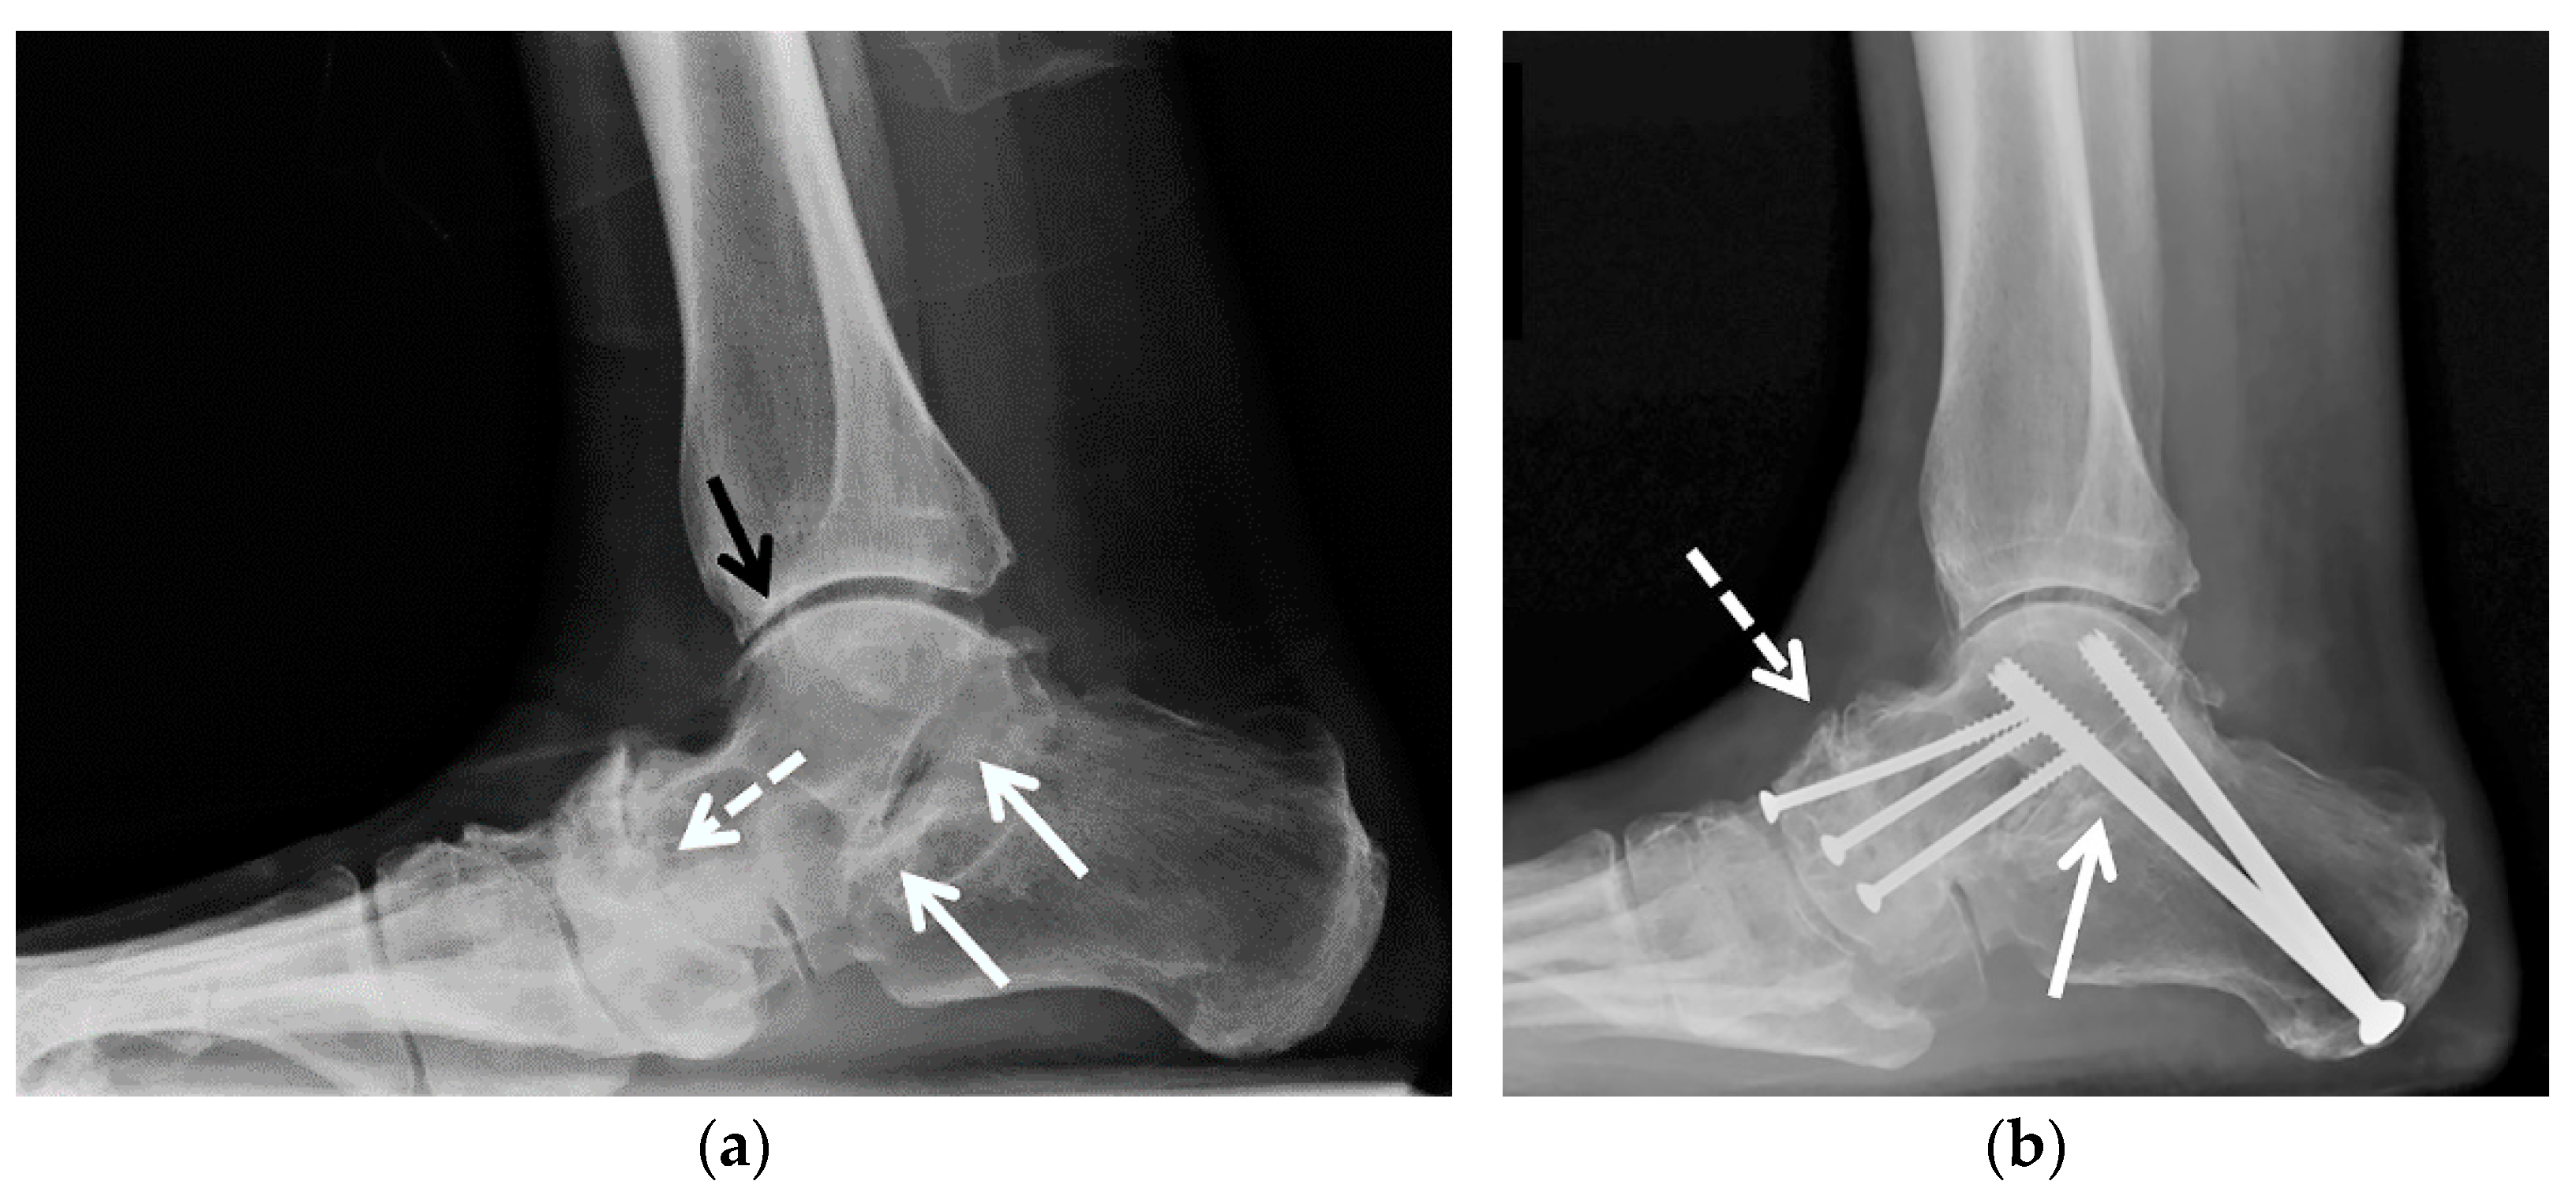 Hindfoot Arthrodesis | Musculoskeletal Key